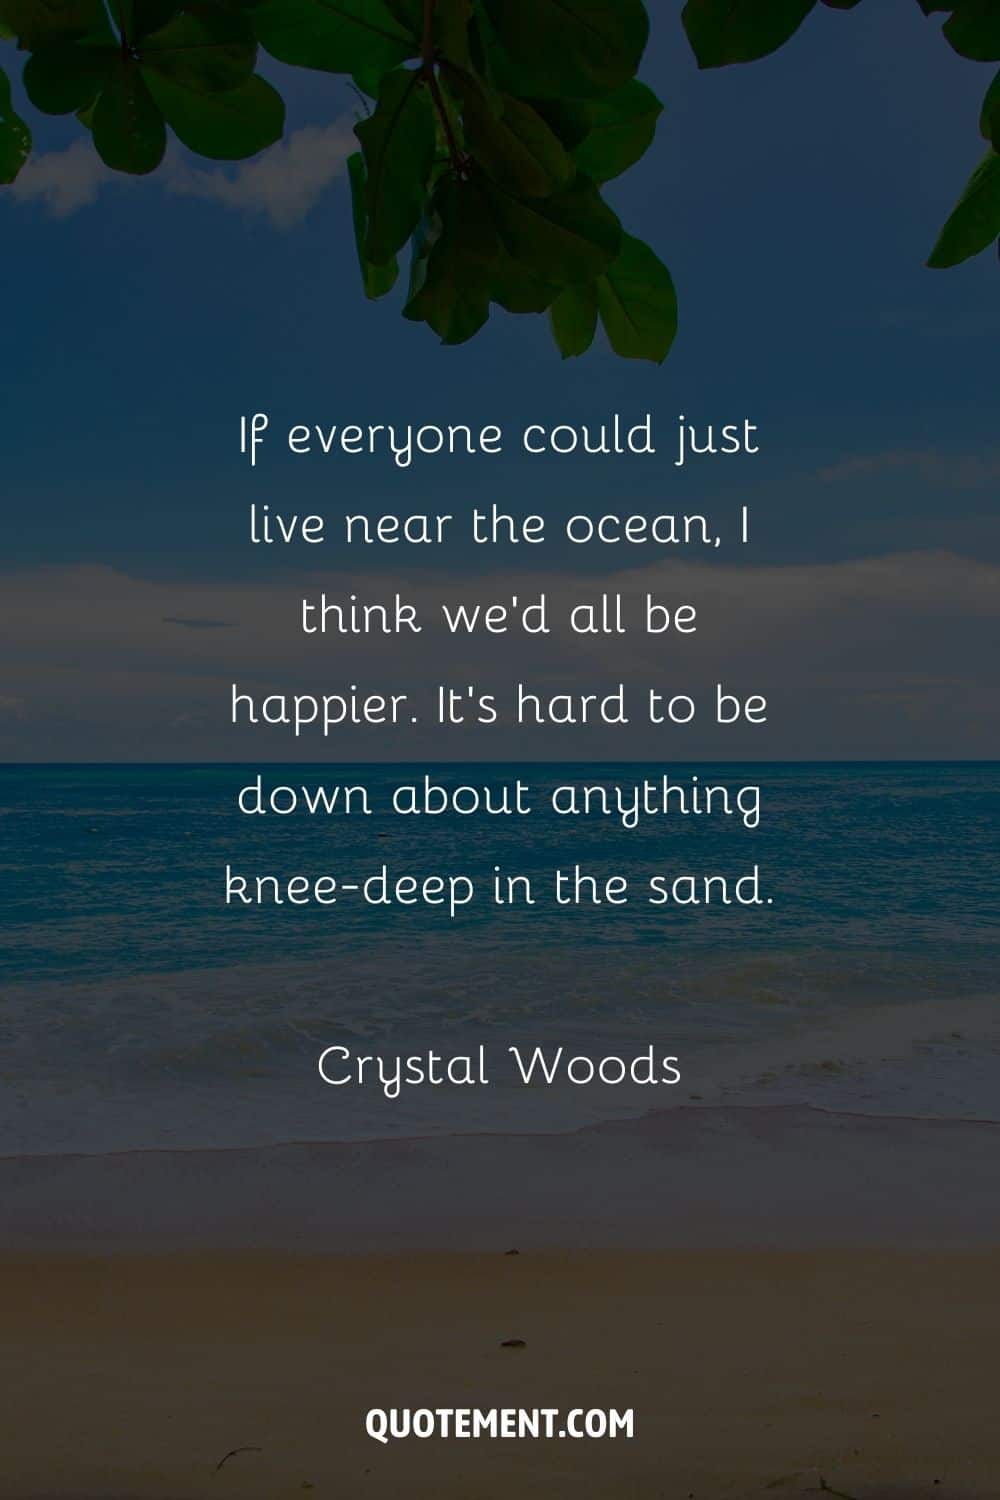 If everyone could just live near the ocean, I think we’d all be happier. It’s hard to be down about anything knee-deep in the sand. – Crystal Woods